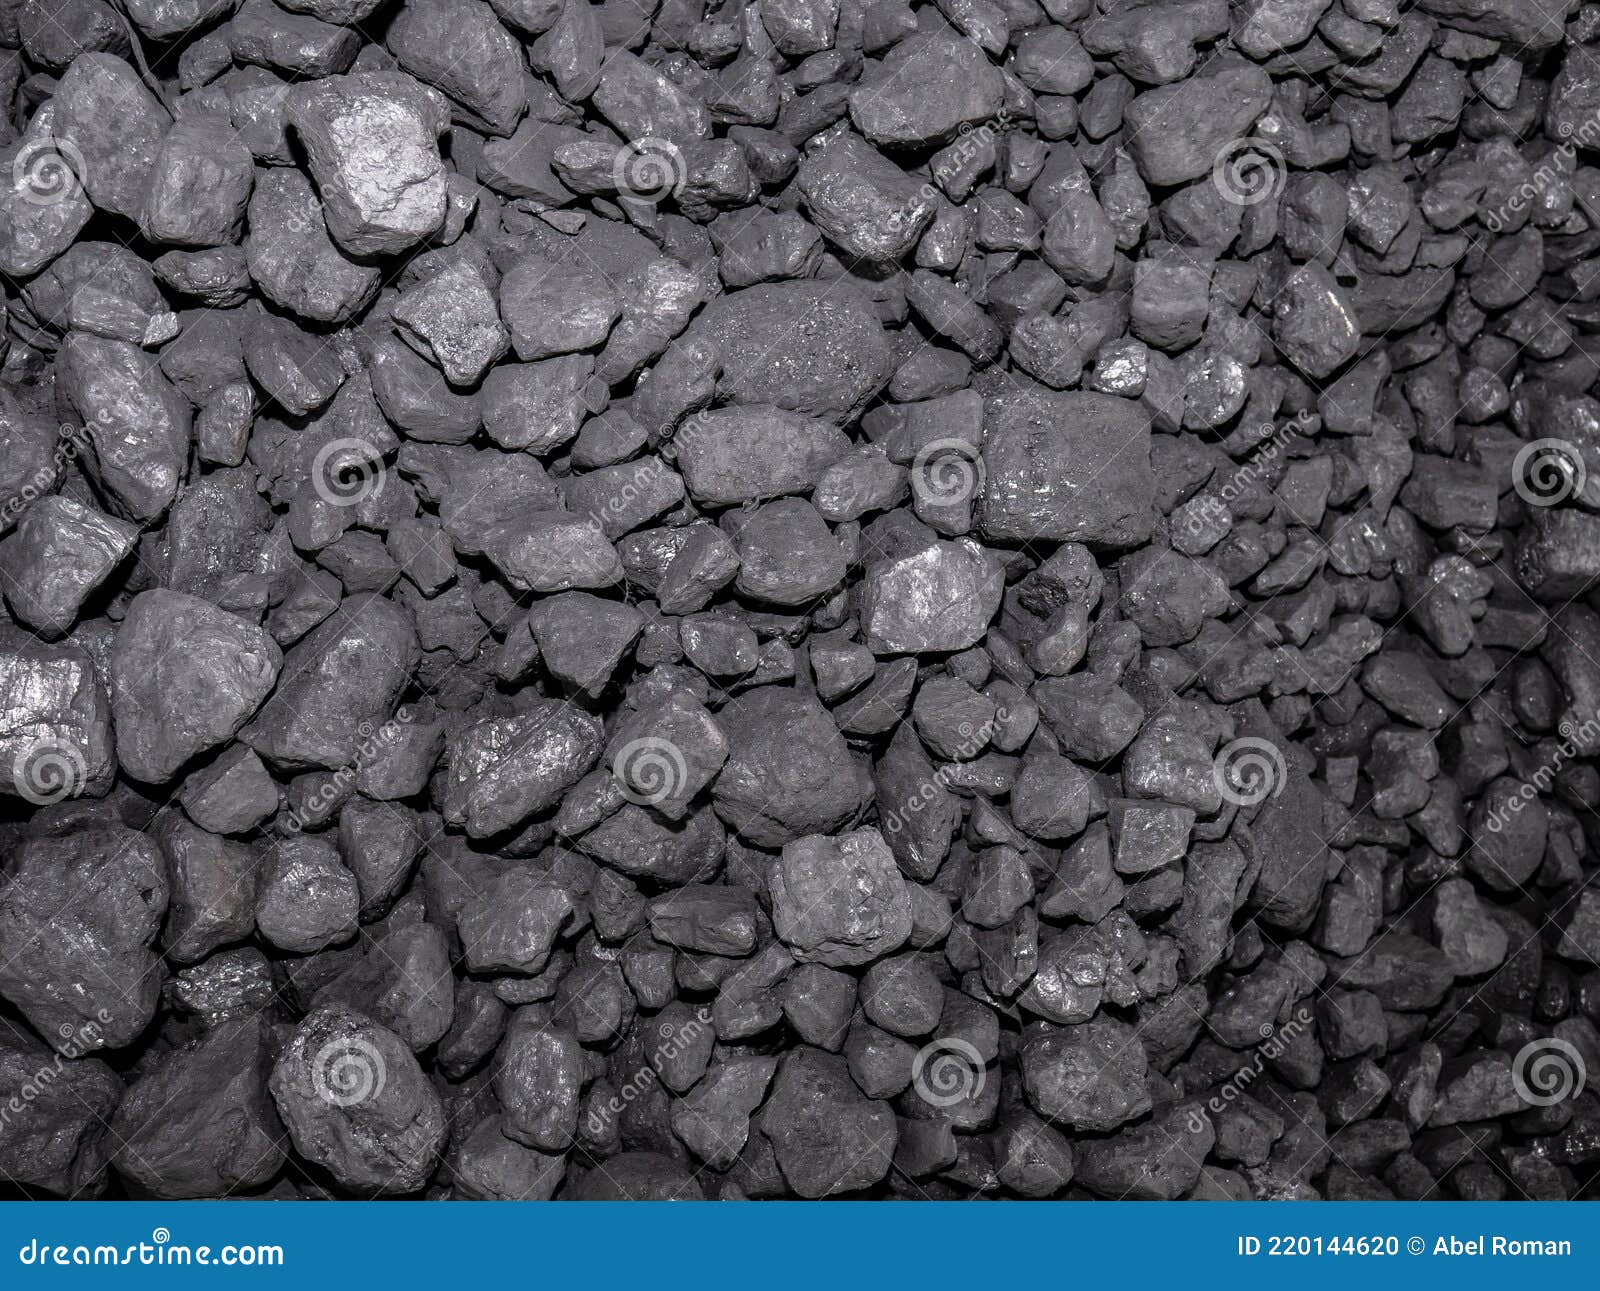 a large pile of carbon stones piled up for subsequent combustion, forming an energetic background of this precious mineral